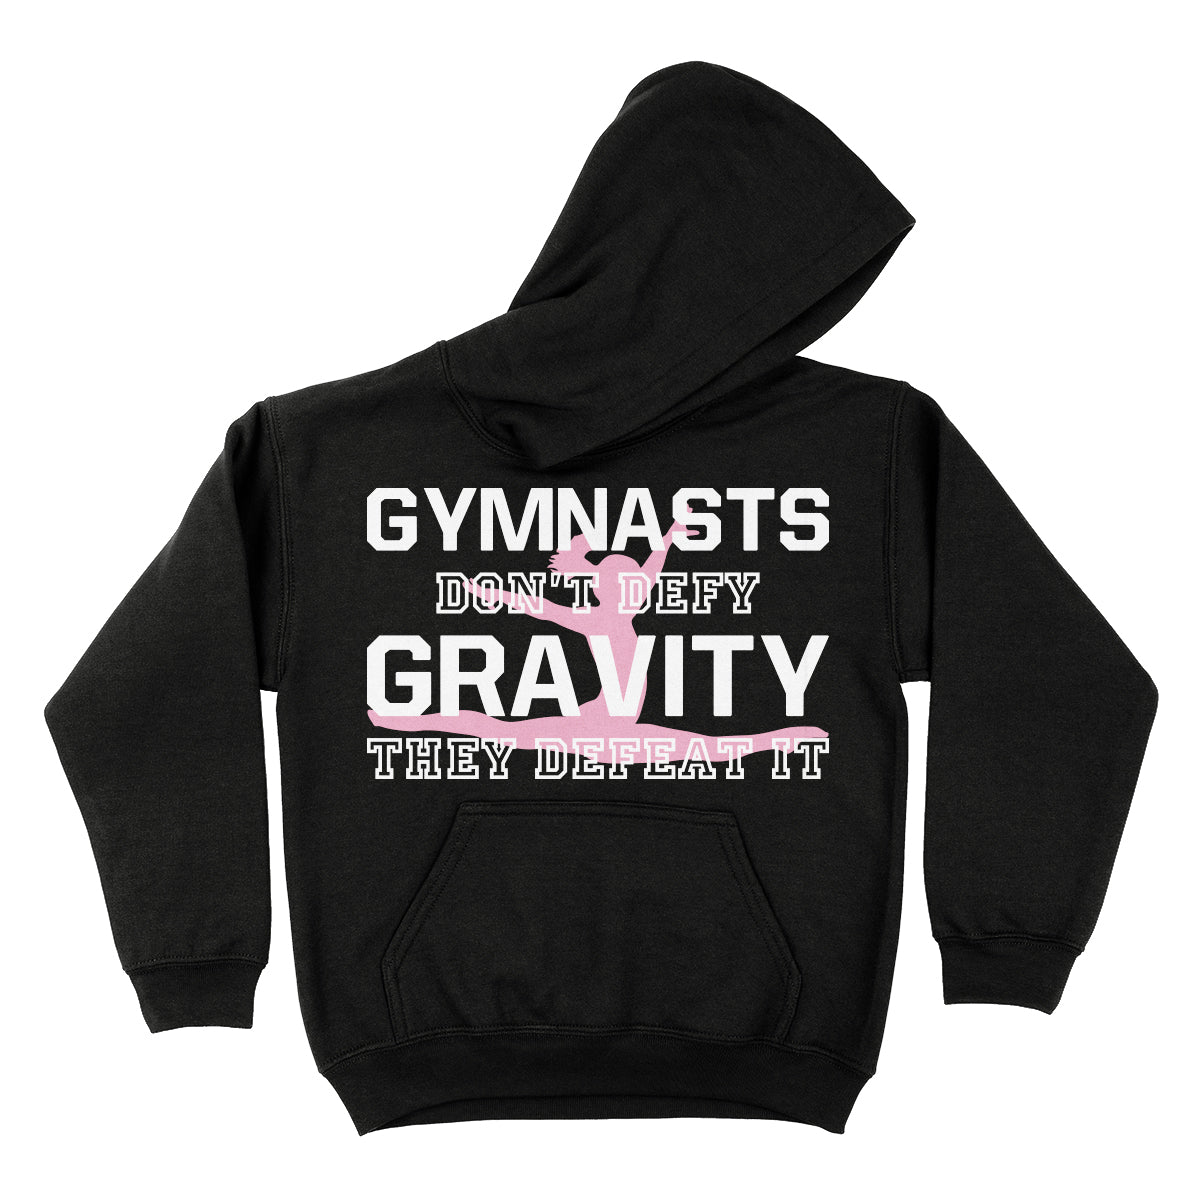 Gymnasts Dont Defy Gravity They Defeat It Black Fleece Long Sleeve Hoodie